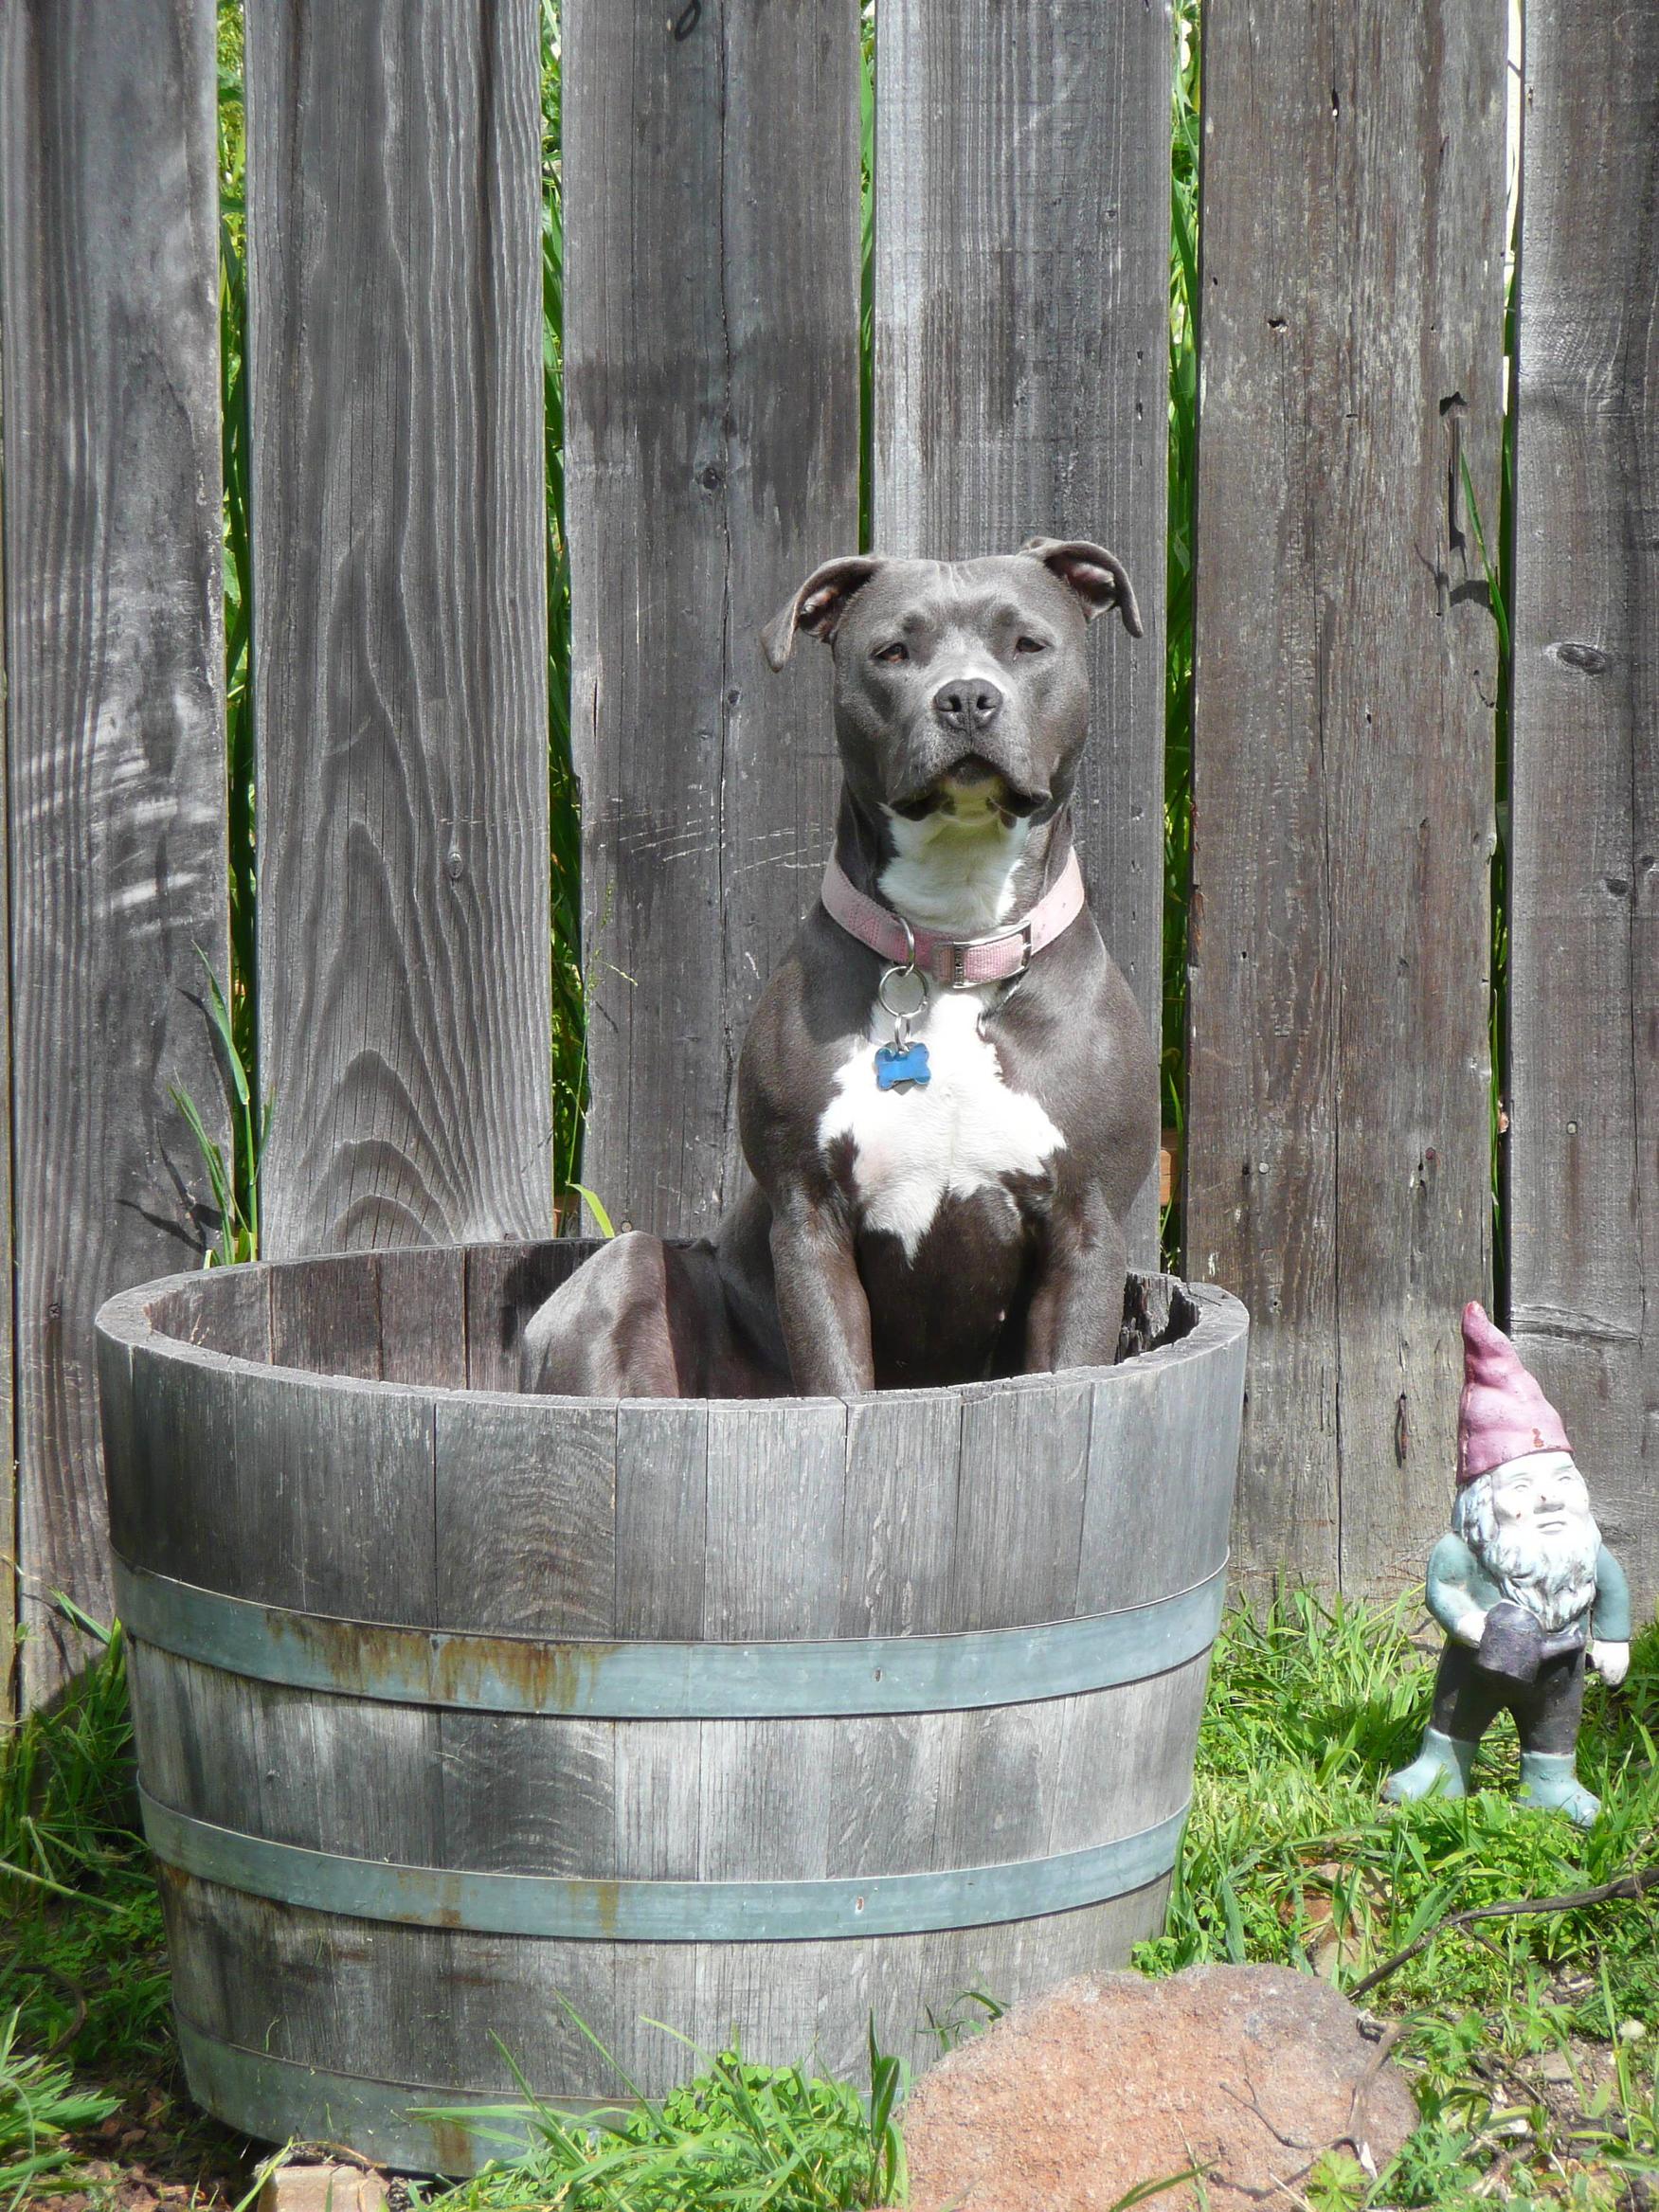 This pitbull is making wine crushing grapes to make you drink and drive.